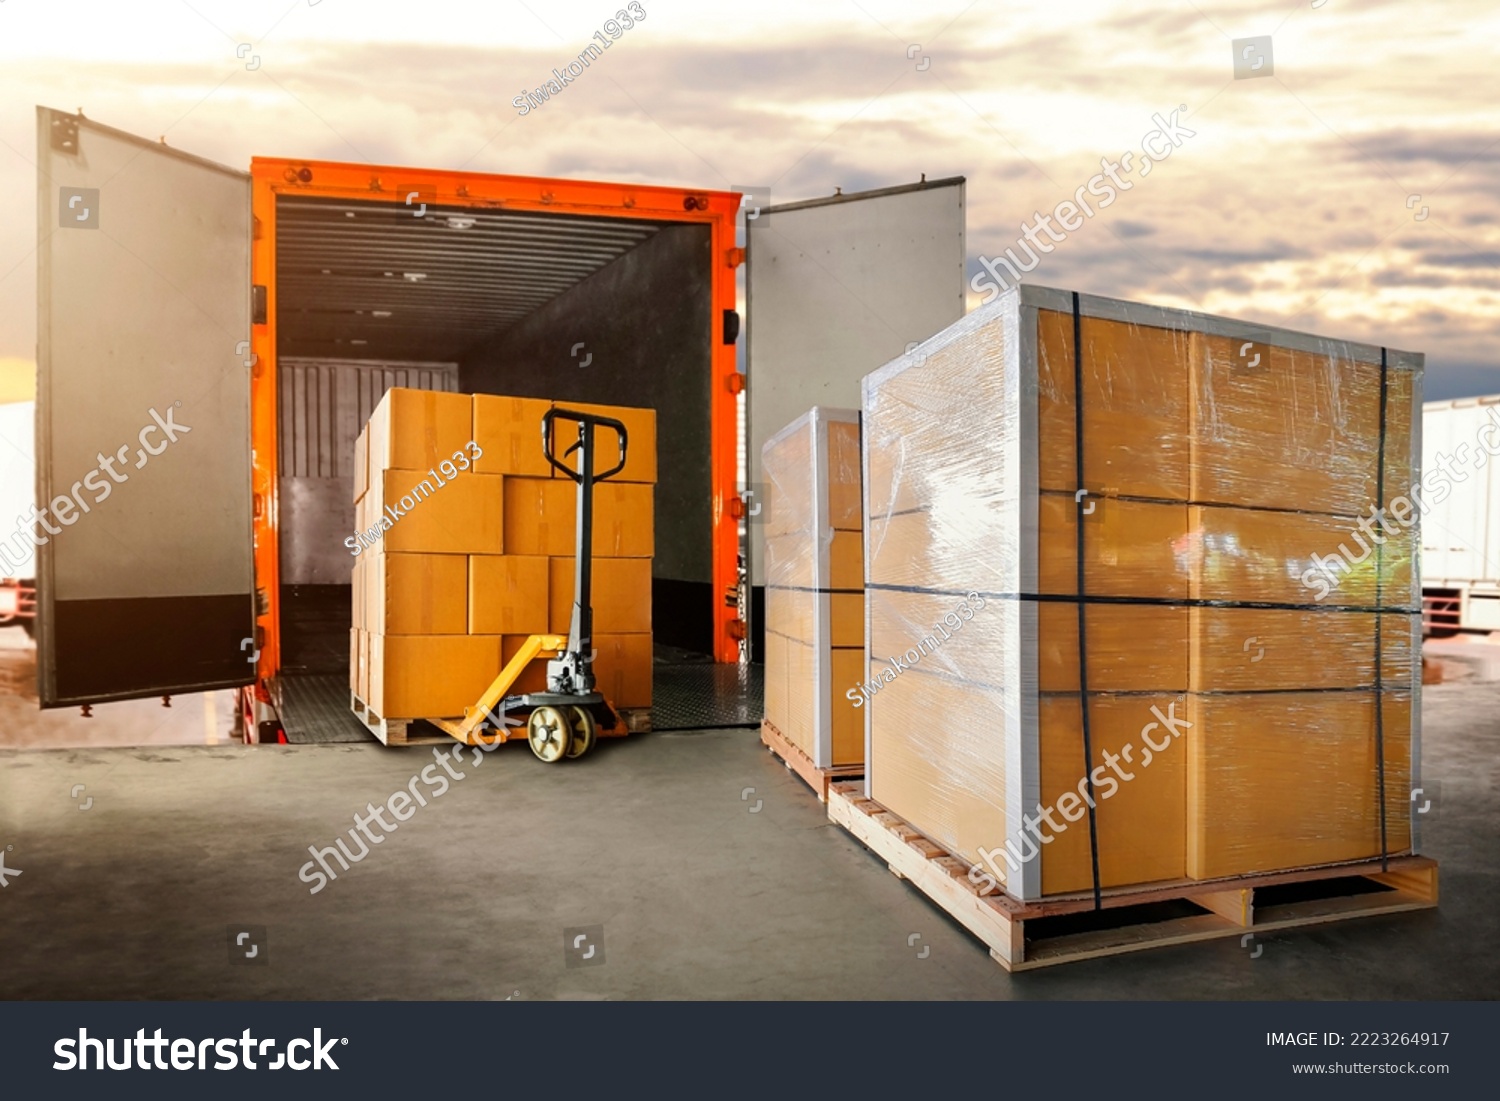 Packaging Boxes Stacked on Pallets Loading into Cargo Container. Delivery Shipping Trucks. Supply Chain Shipment Goods. Distribution Supplies Warehouse. Freight Truck Transport Logistics #2223264917